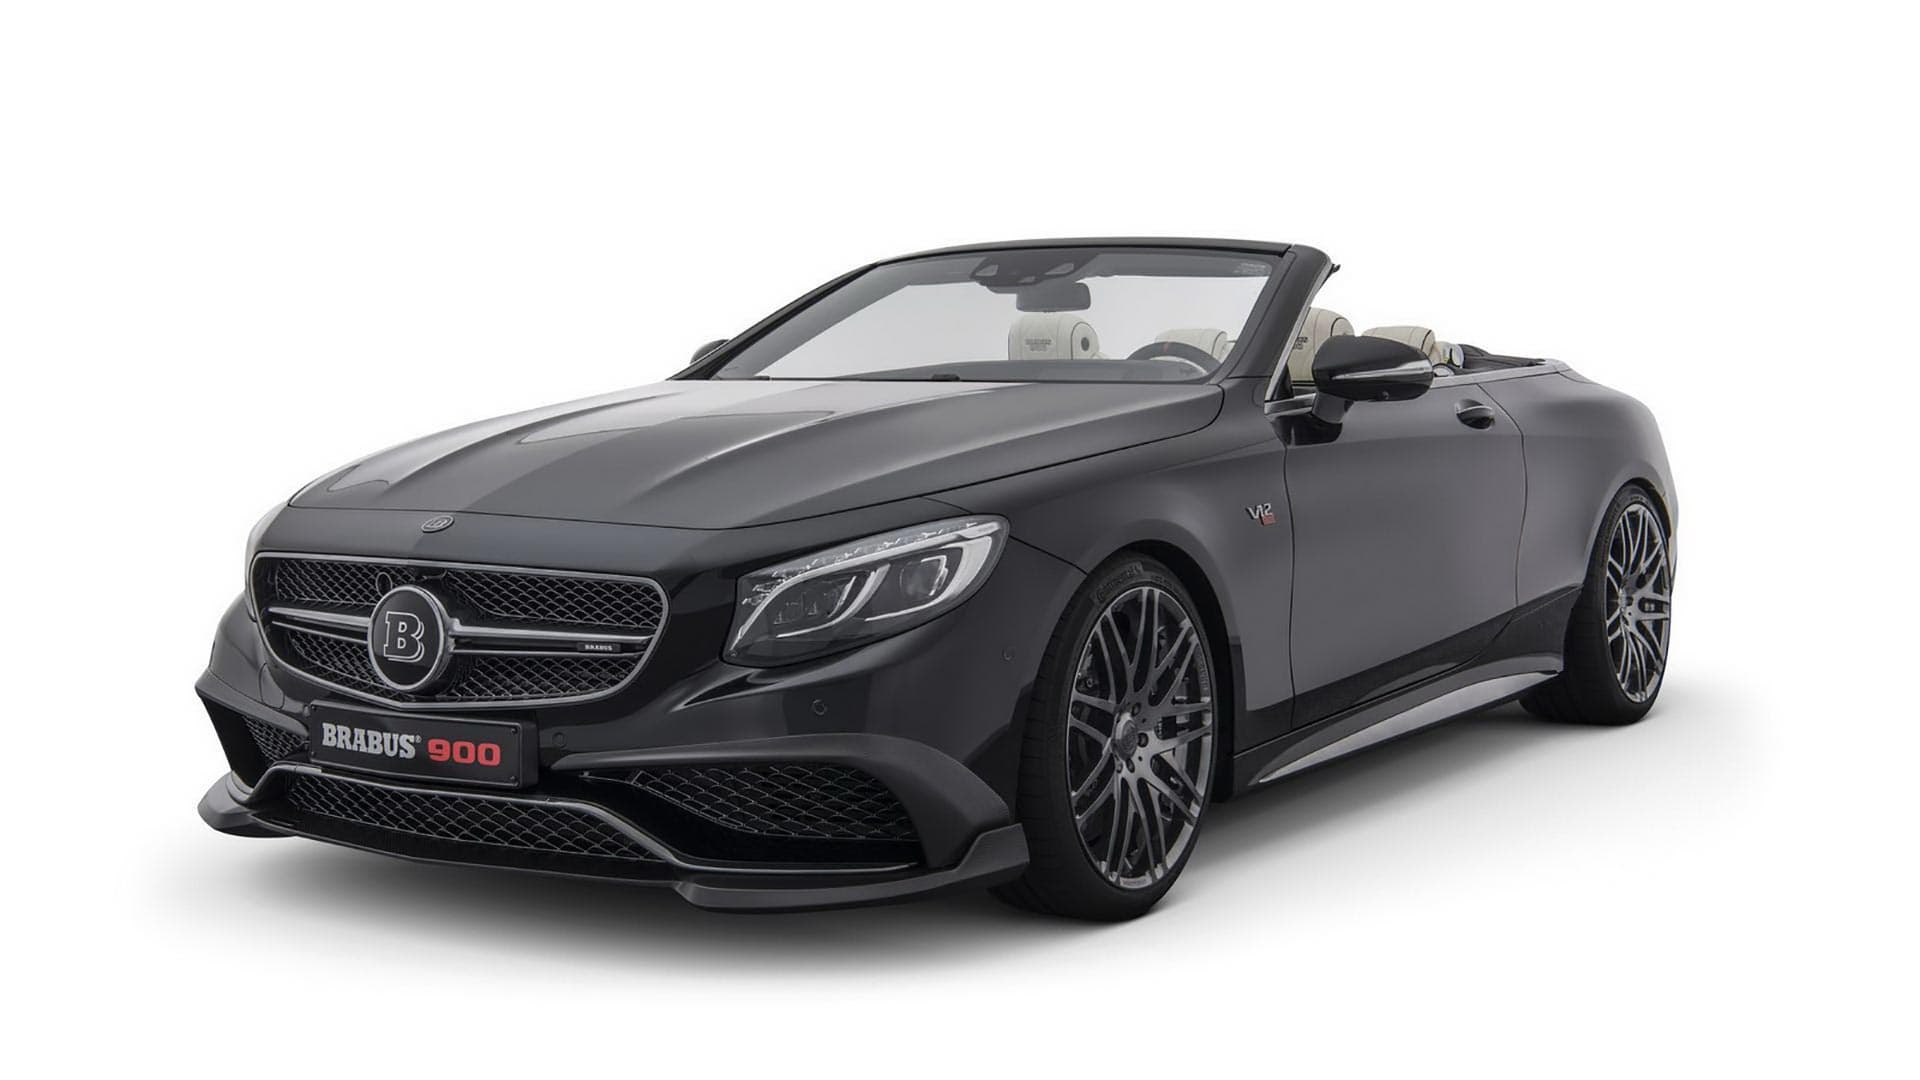 The Brabus Rocket 900 is the World’s Fastest 4-Seater Cabriolet